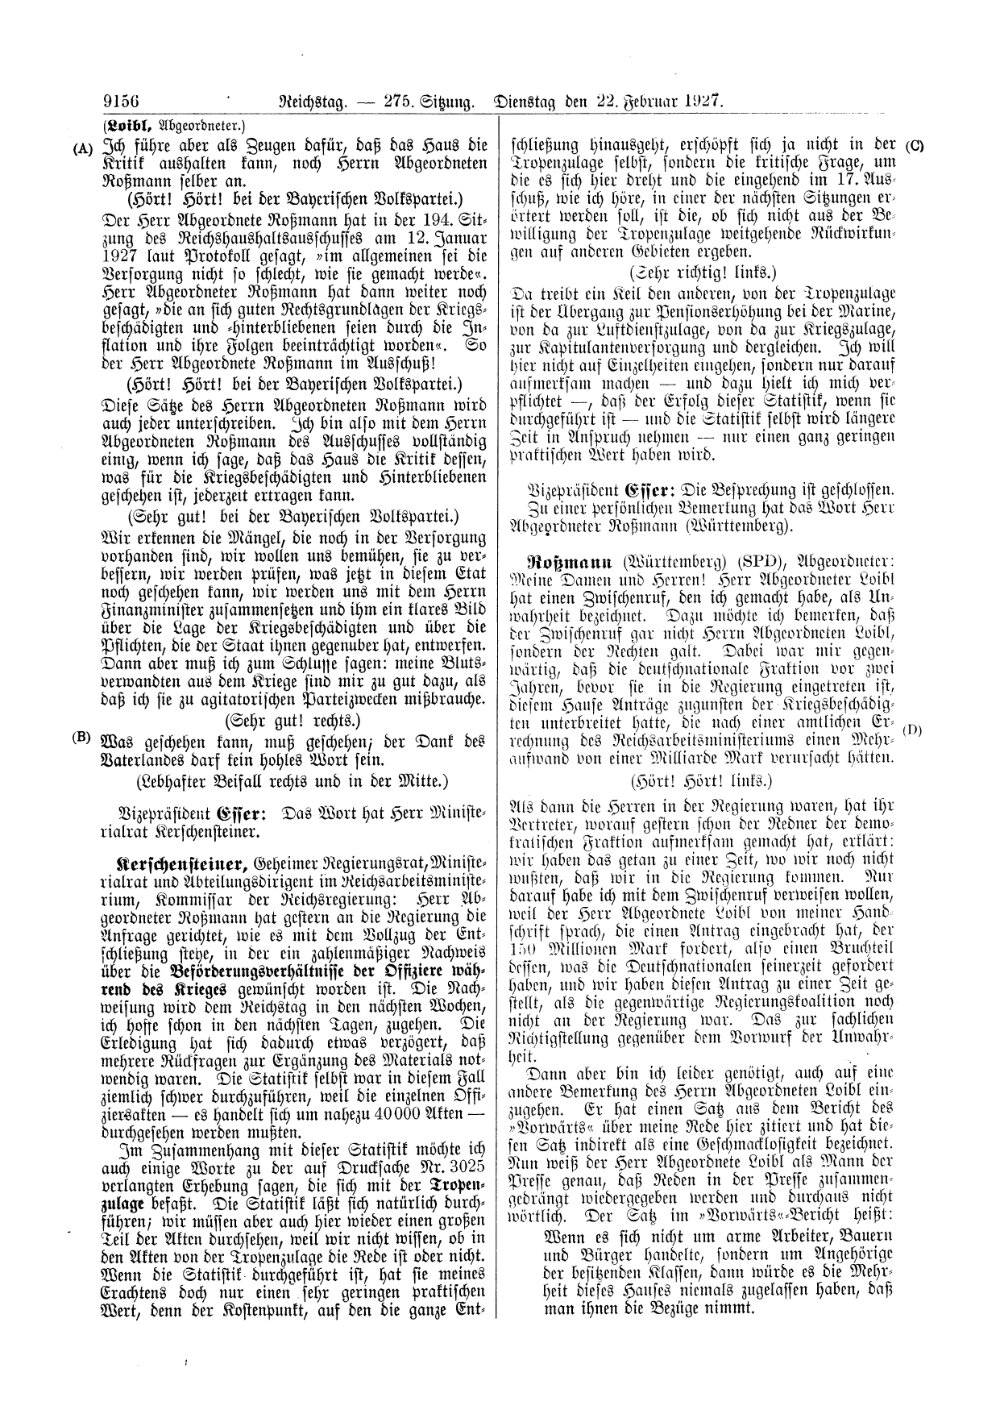 Scan of page 9156